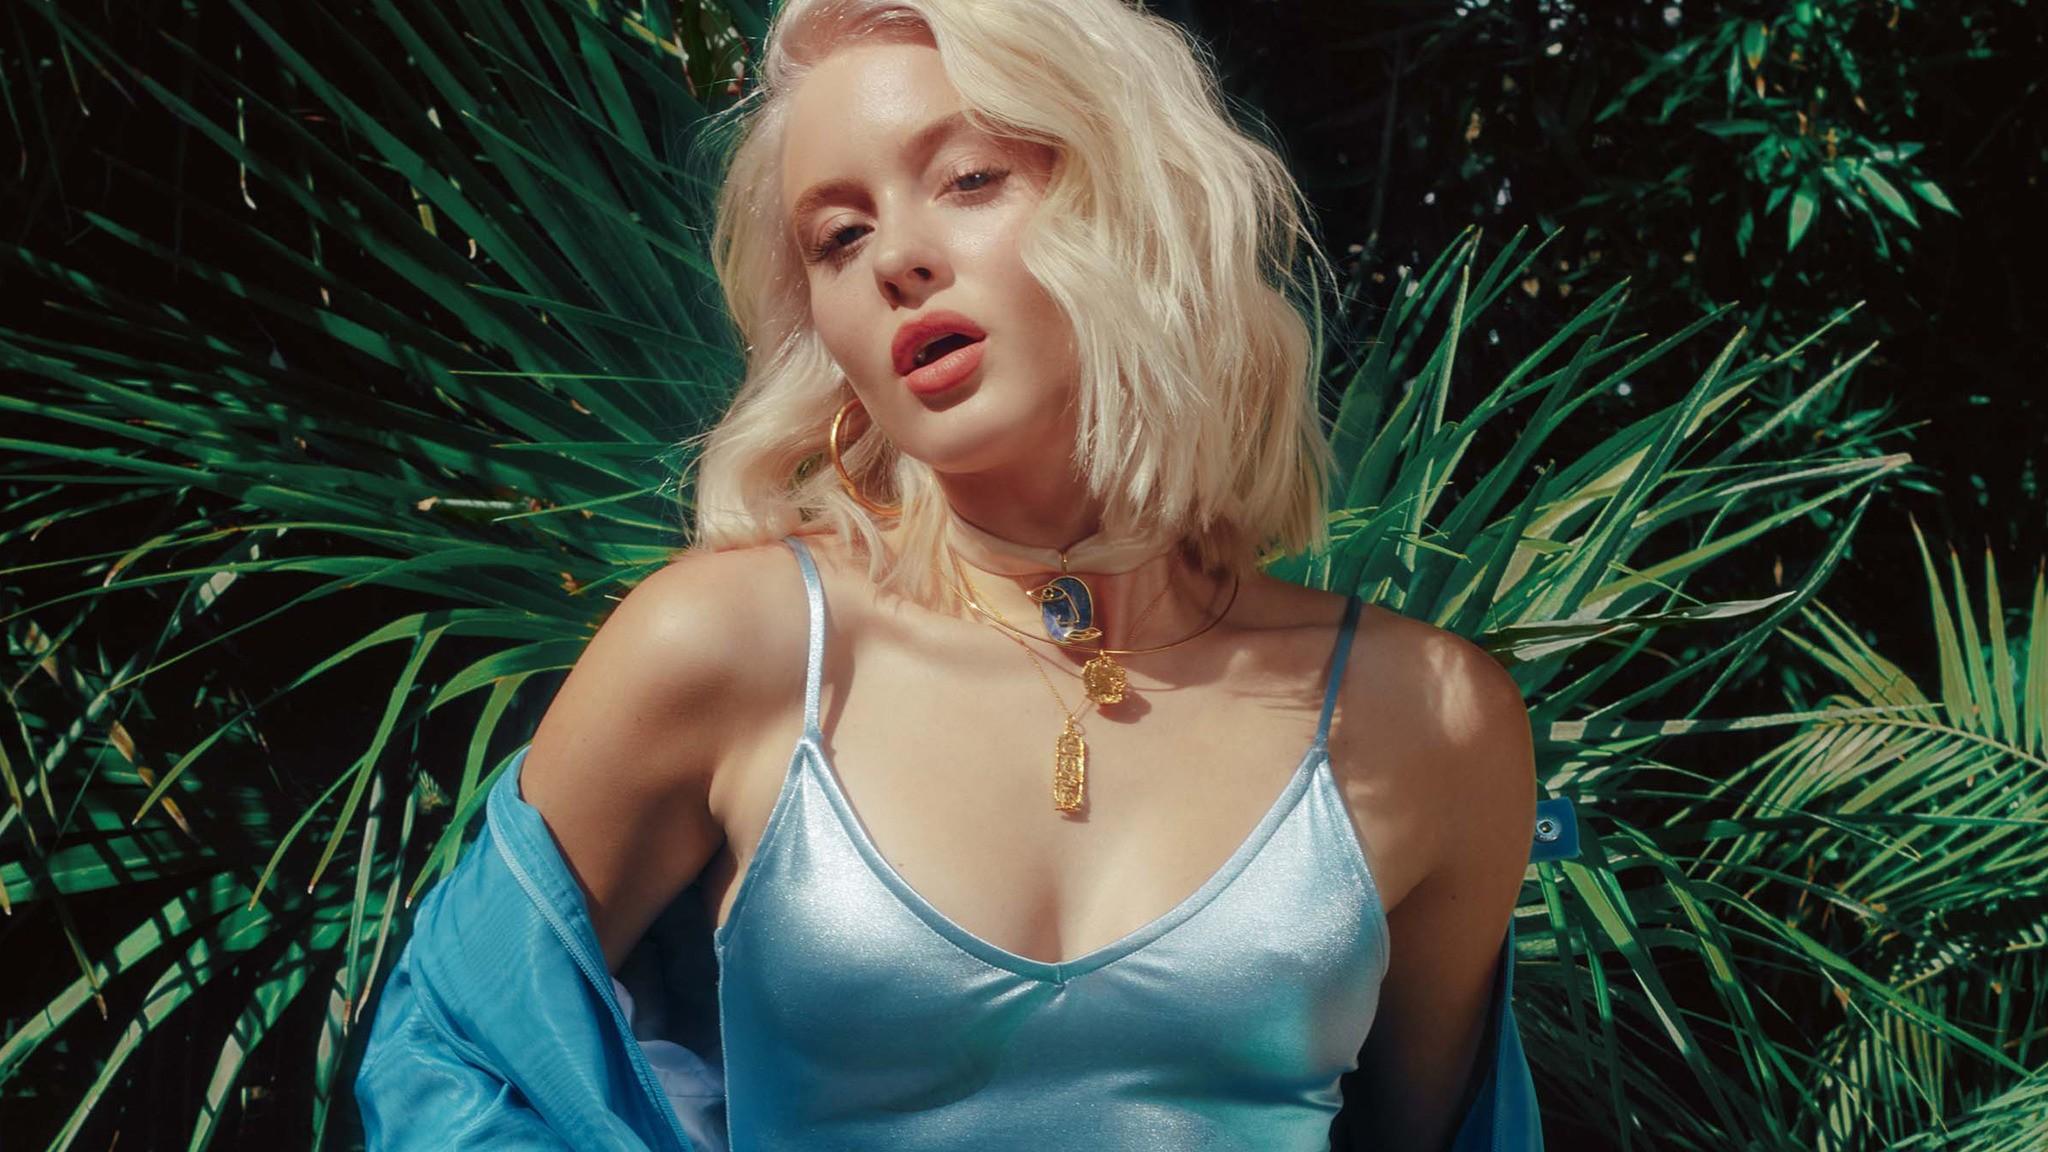 Zara Larsson at Neptune Theatre in Seattle, WA on Tues Sept 8 pm